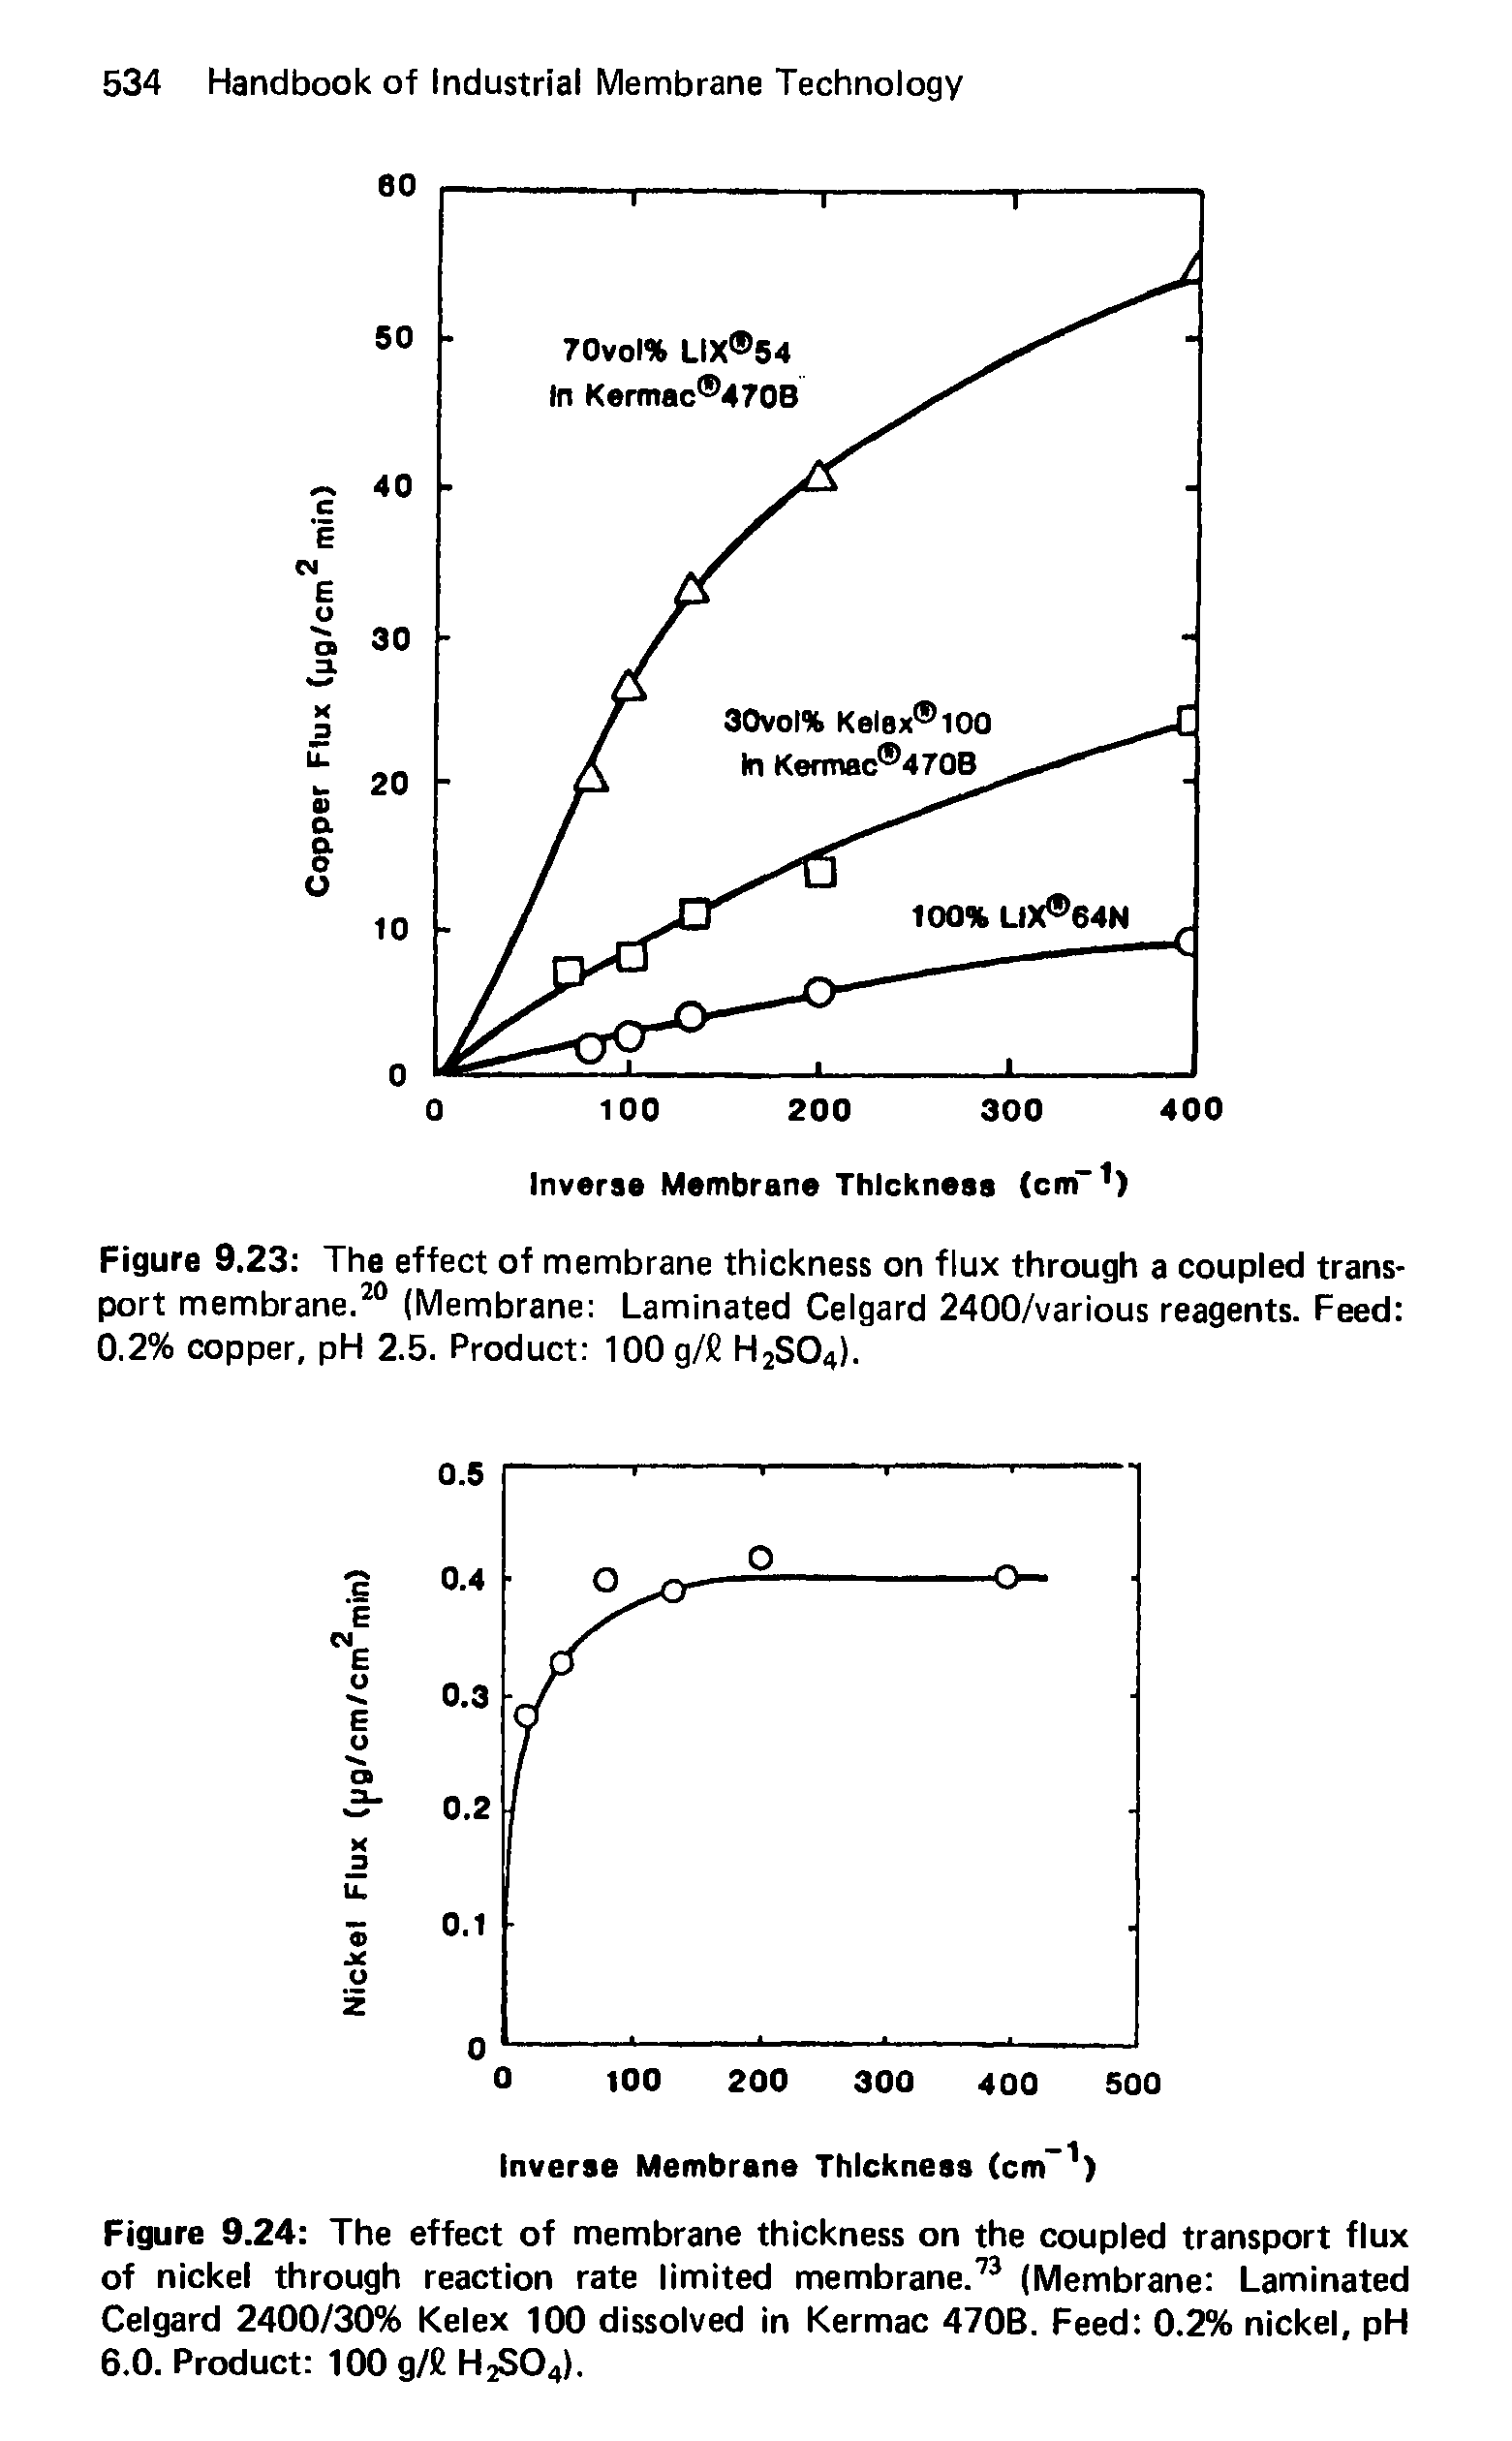 Figure 9.24 The effect of membrane thickness on the coupled transport flux of nickel through reaction rate limited membrane.73 (Membrane Laminated Celgard 2400/30% Kelex 100 dissolved in Kermac 470B. Feed 0.2% nickel, pH 6.0. Product 100 g/fi HjSO. ...